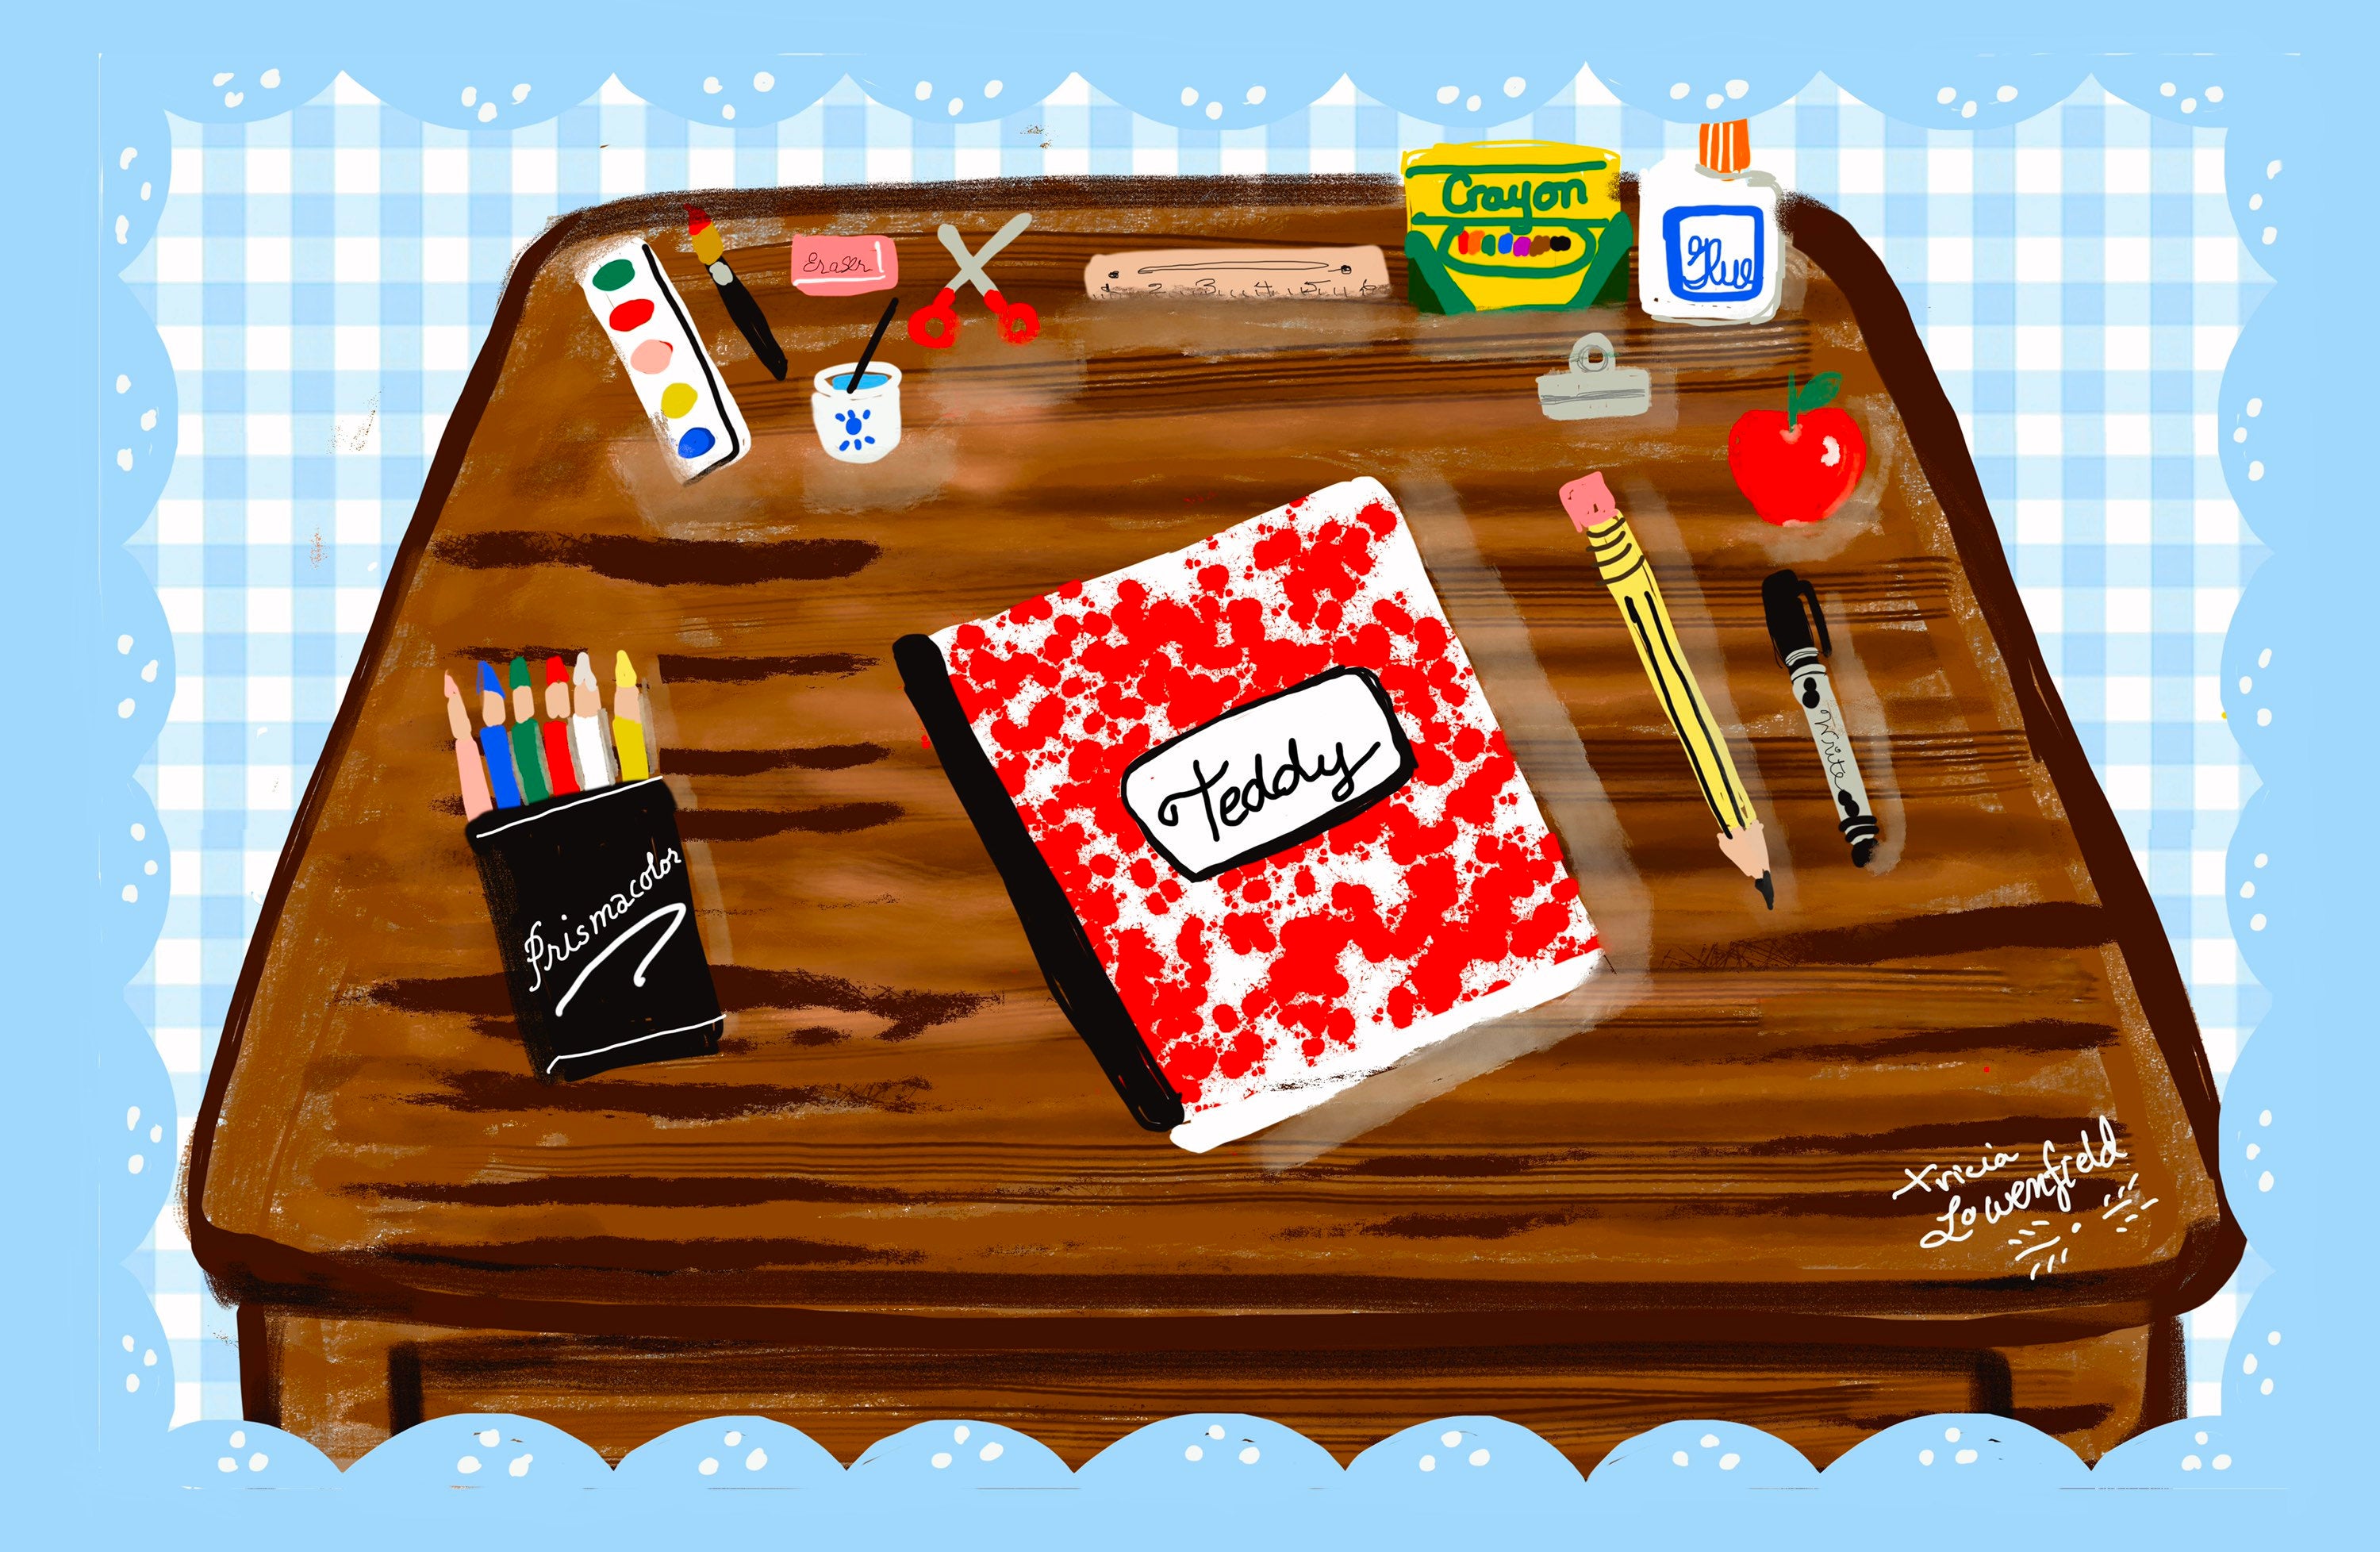 Laminated Placemat - School Desk - Tricia Lowenfield Design